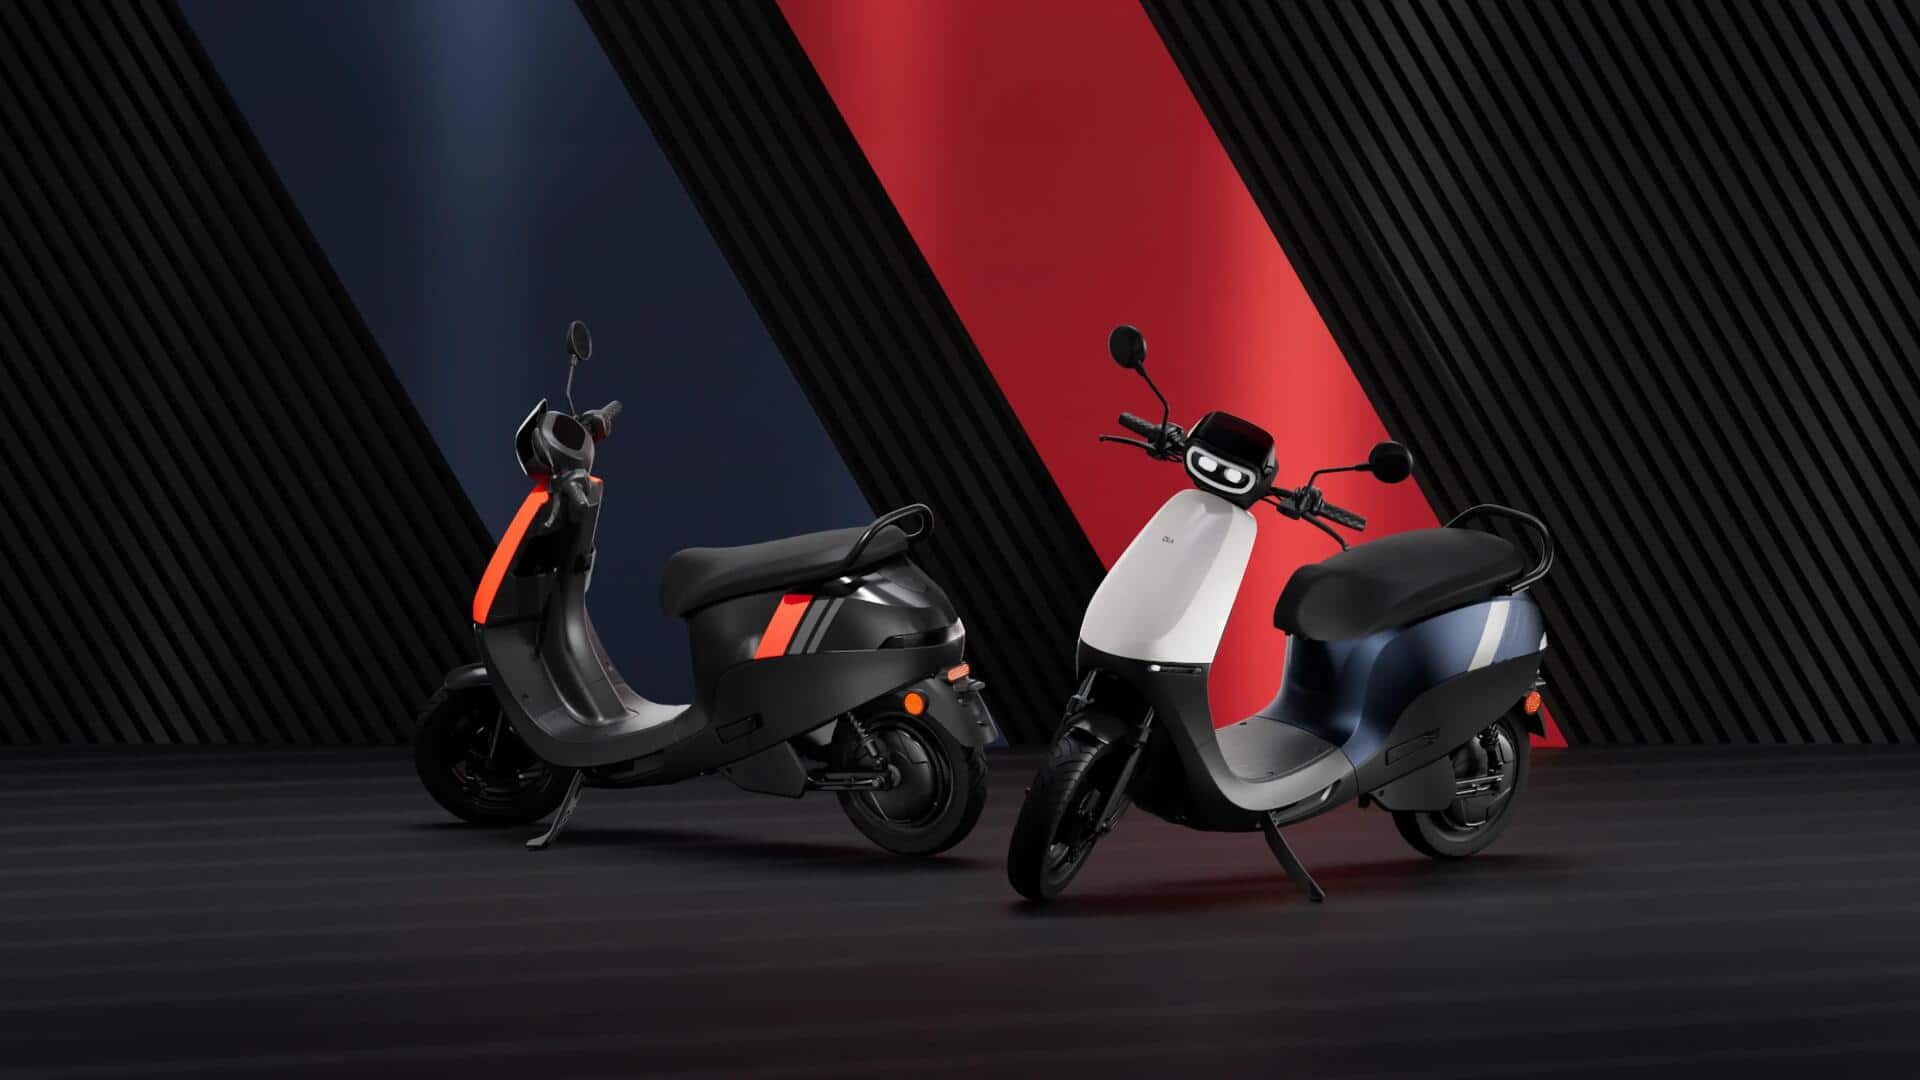 You may soon be able to rent an Ola e-scooter